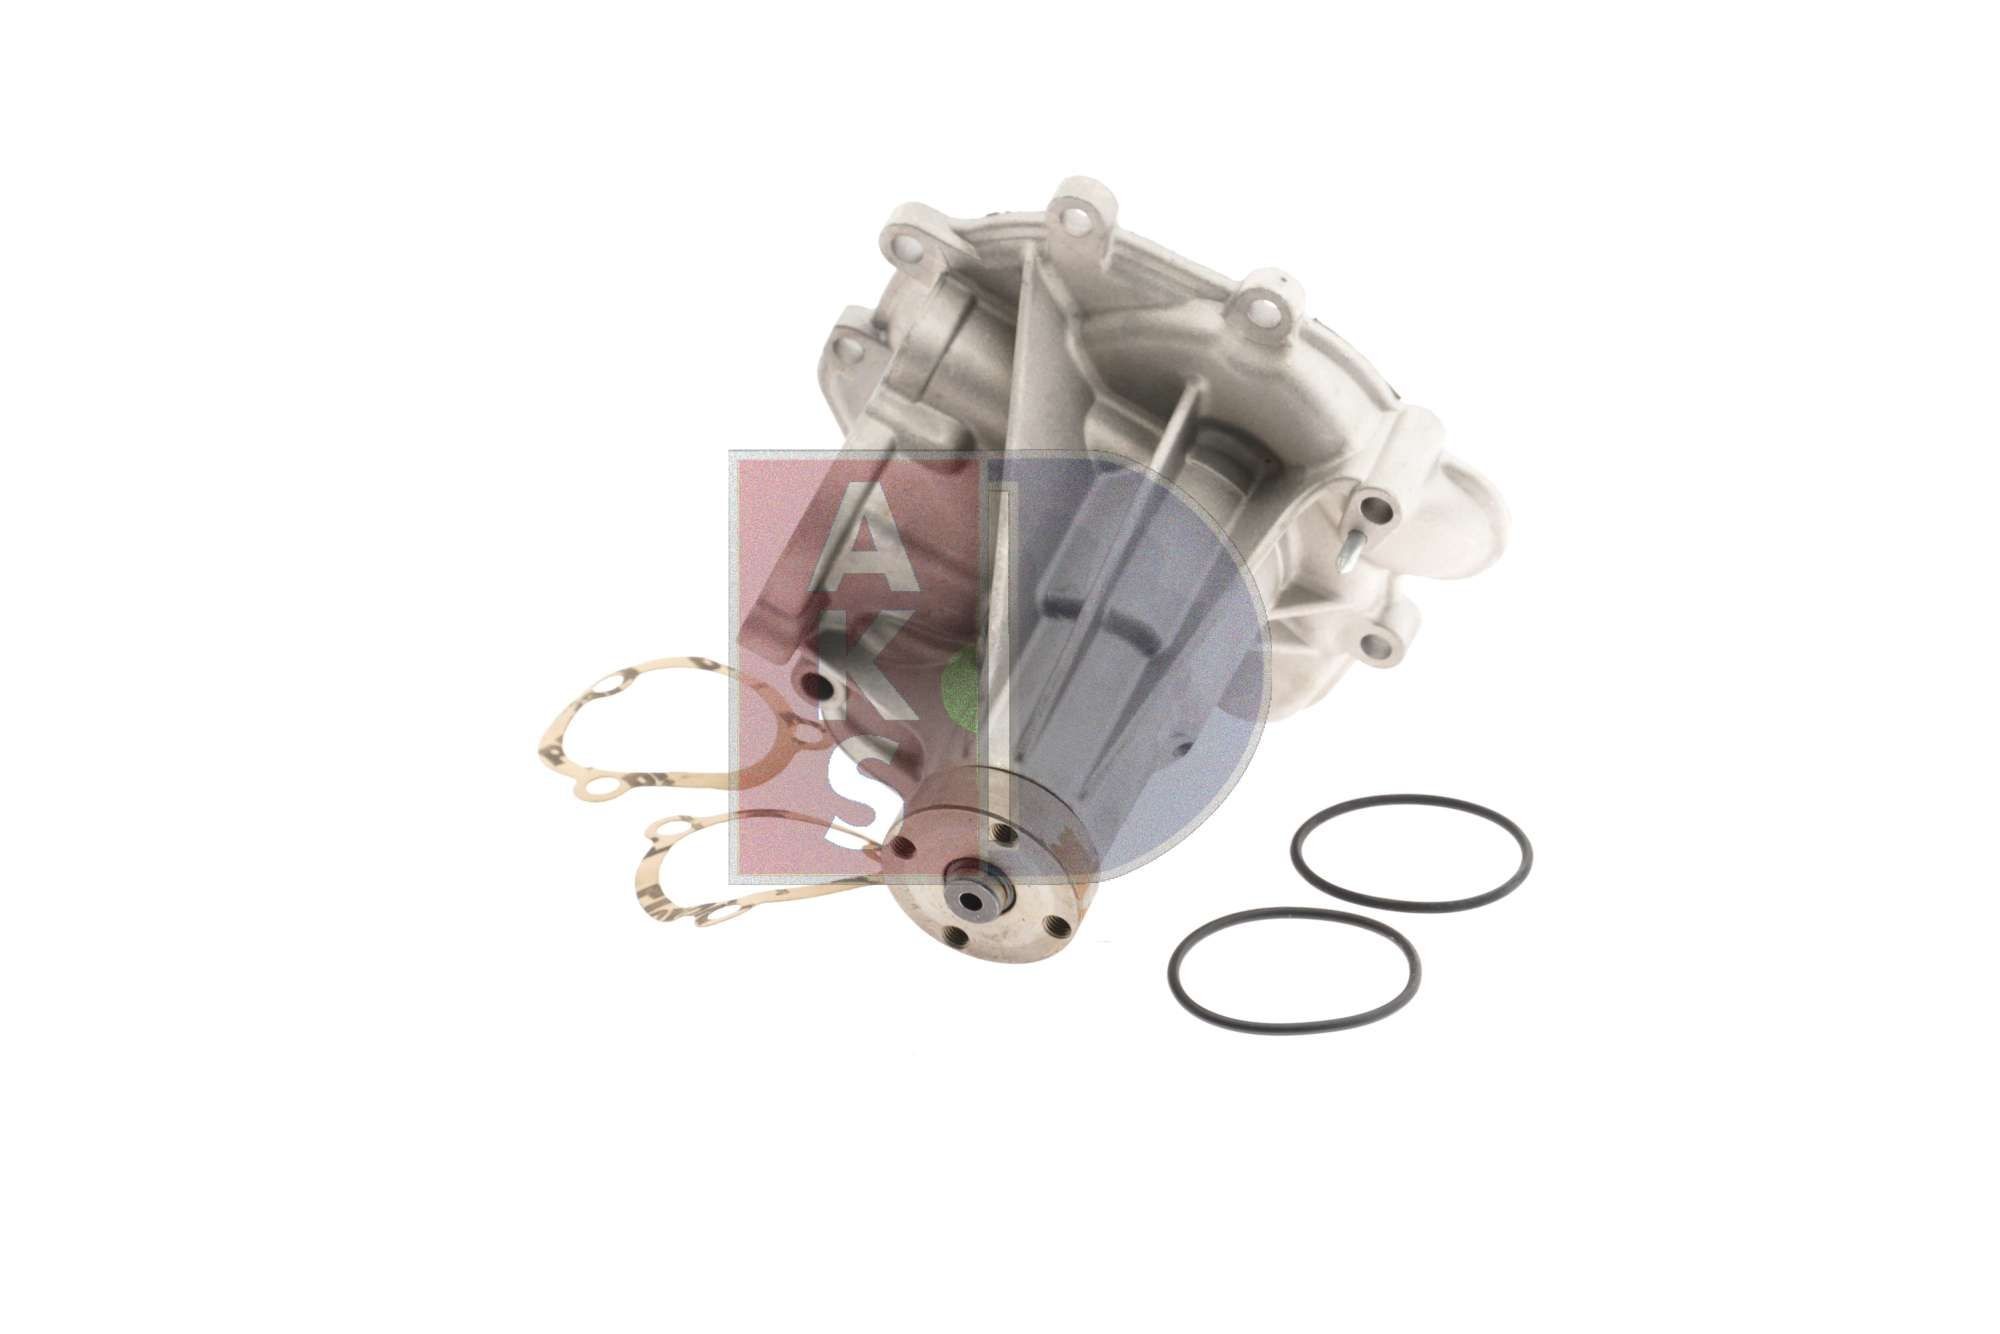 AKS DASIS Water pump for engine 570395N suitable for MERCEDES-BENZ S-Class, G-Class, SL